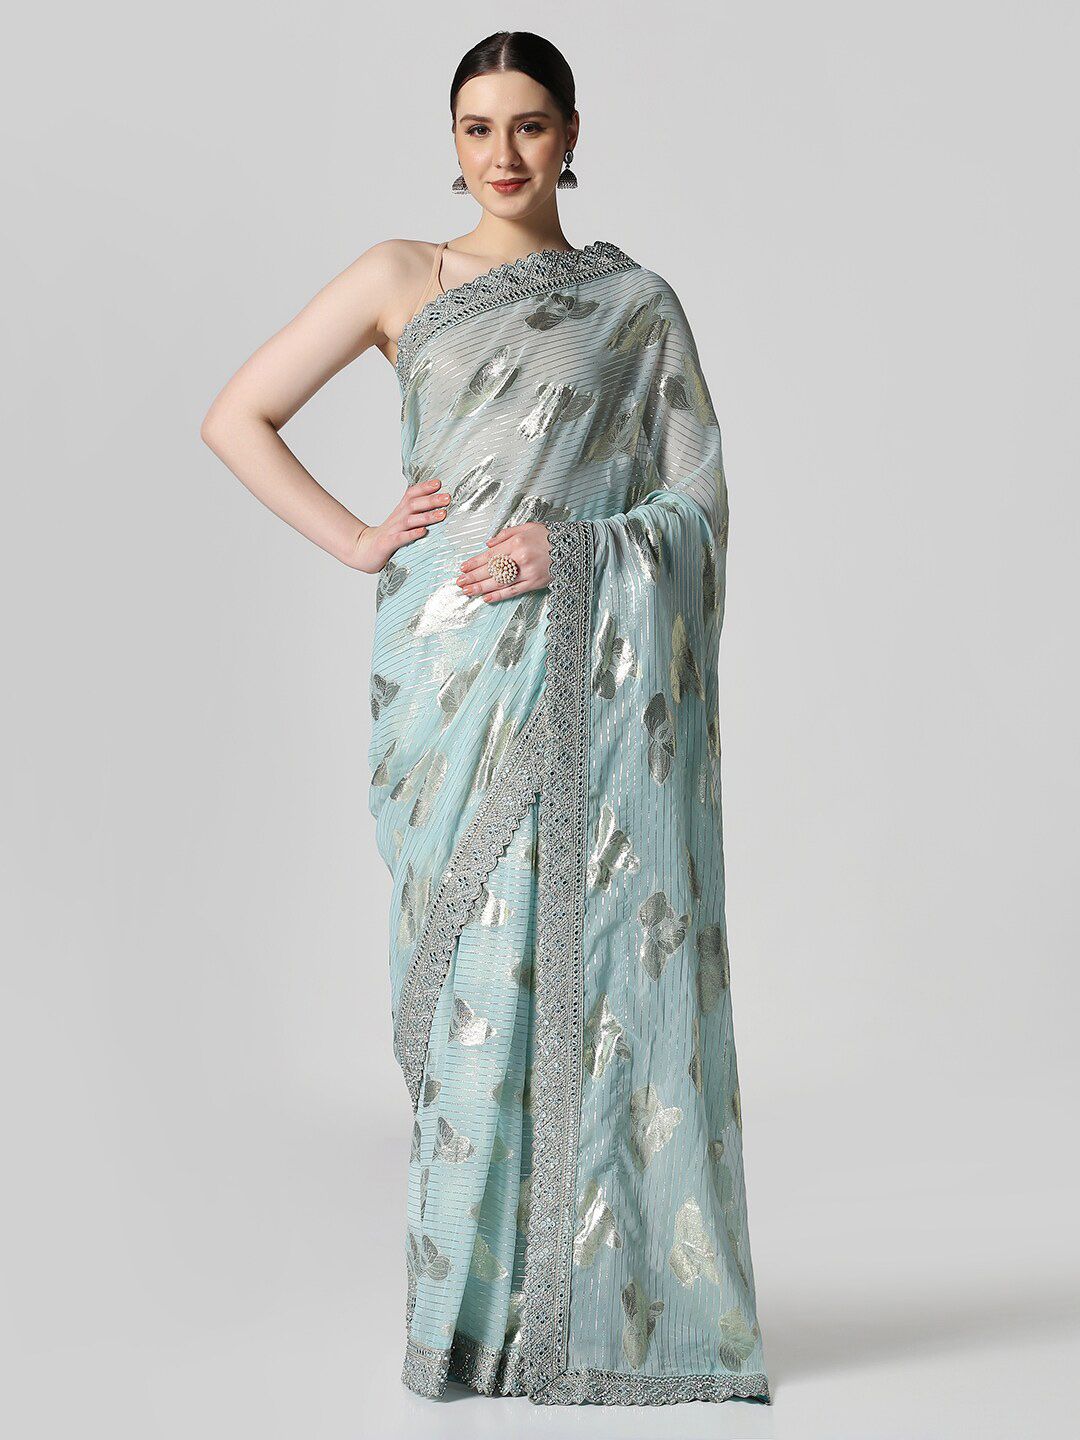 BOMBAY SELECTIONS Woven Design Mirror Work Saree Price in India